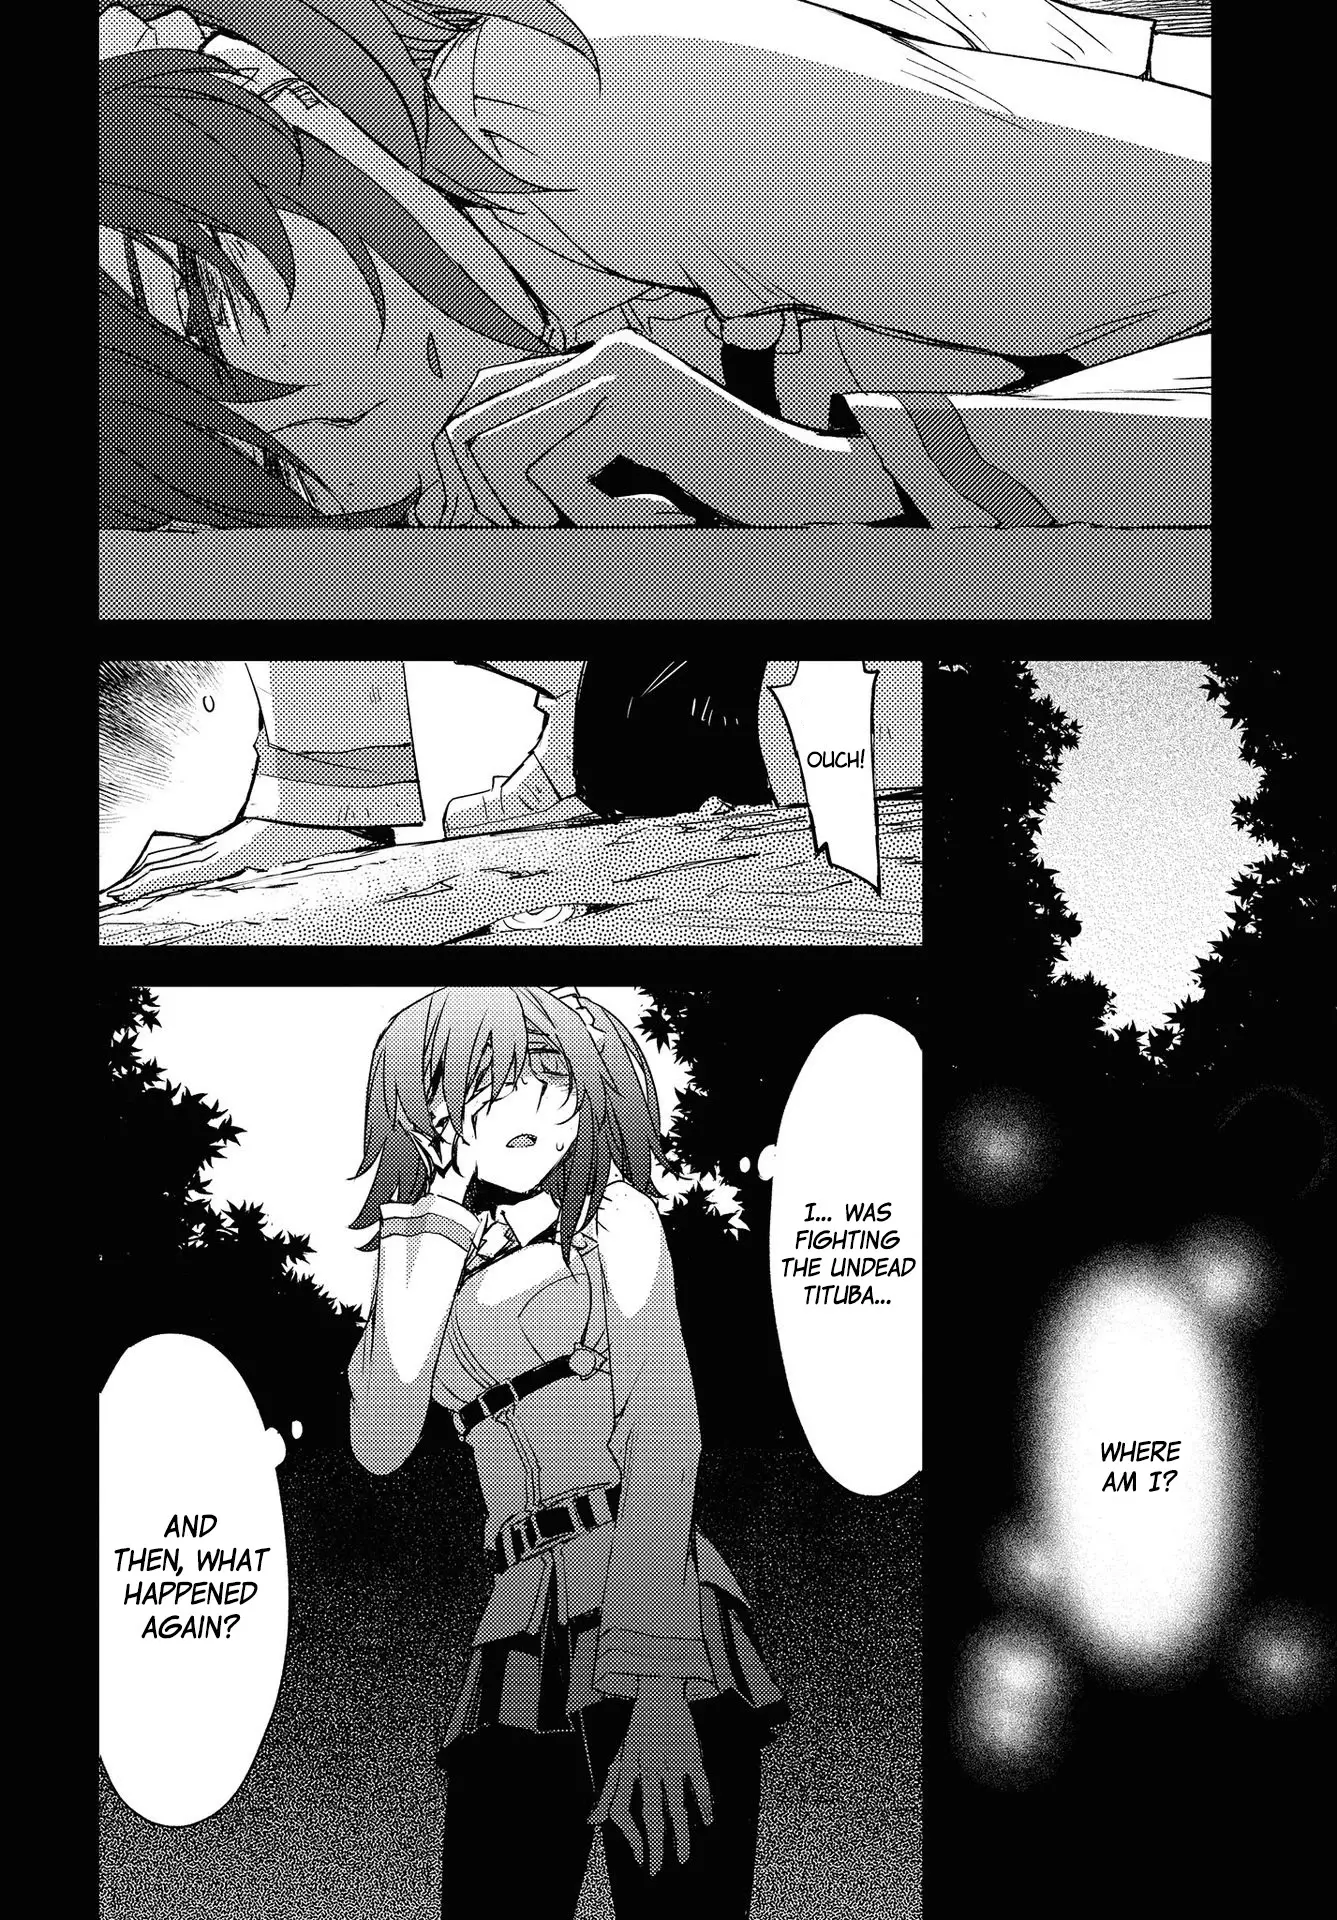 Fate/grand Order: Epic Of Remnant - Subspecies Singularity Iv: Taboo Advent Salem: Salem Of Heresy - 18 page 15